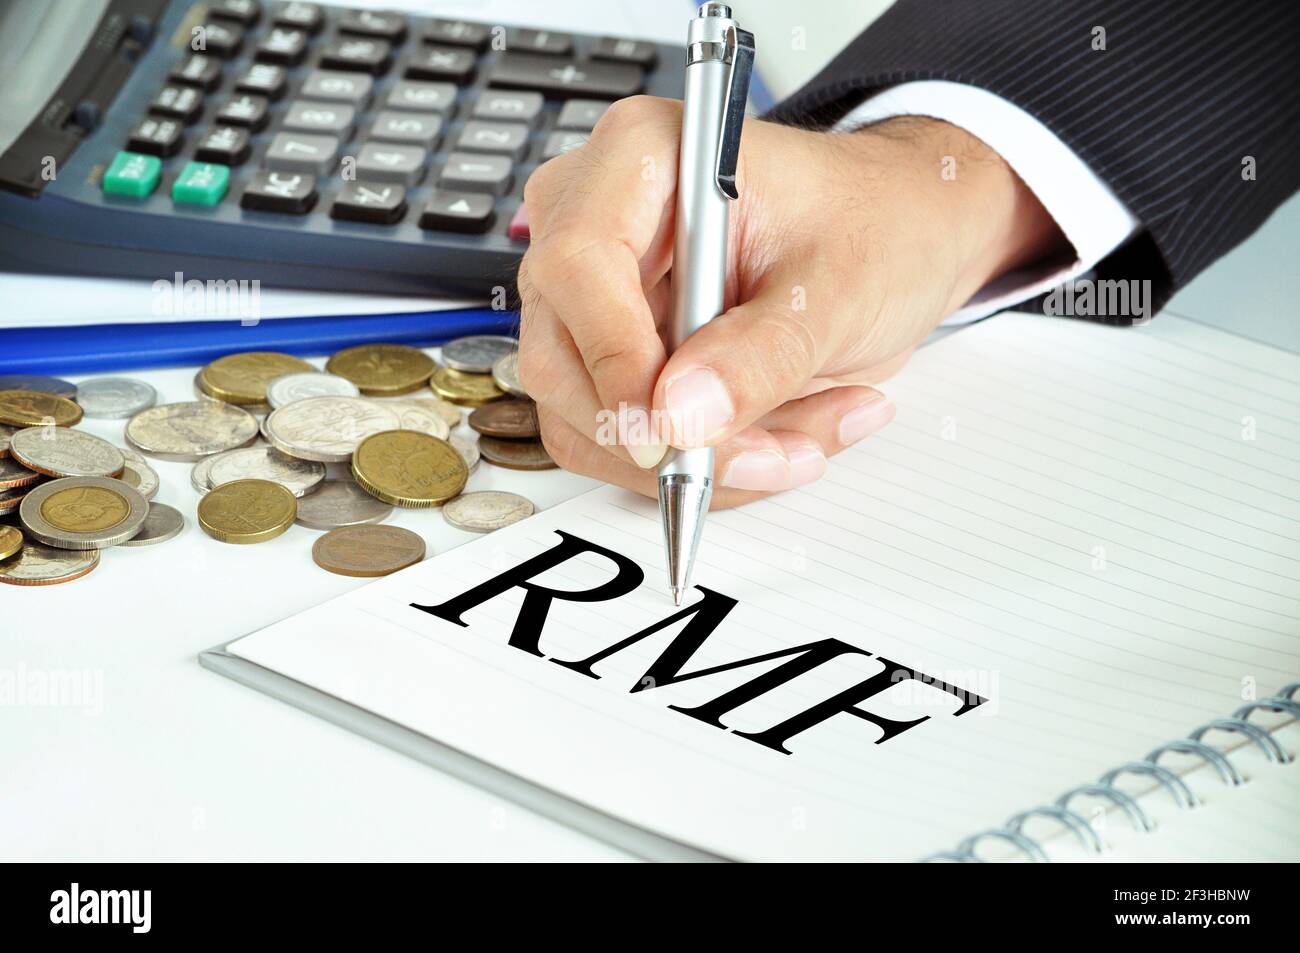 Businessman hand with pen pointing to RMF (Retirement Mutual Fund) sign on the paper Stock Photo